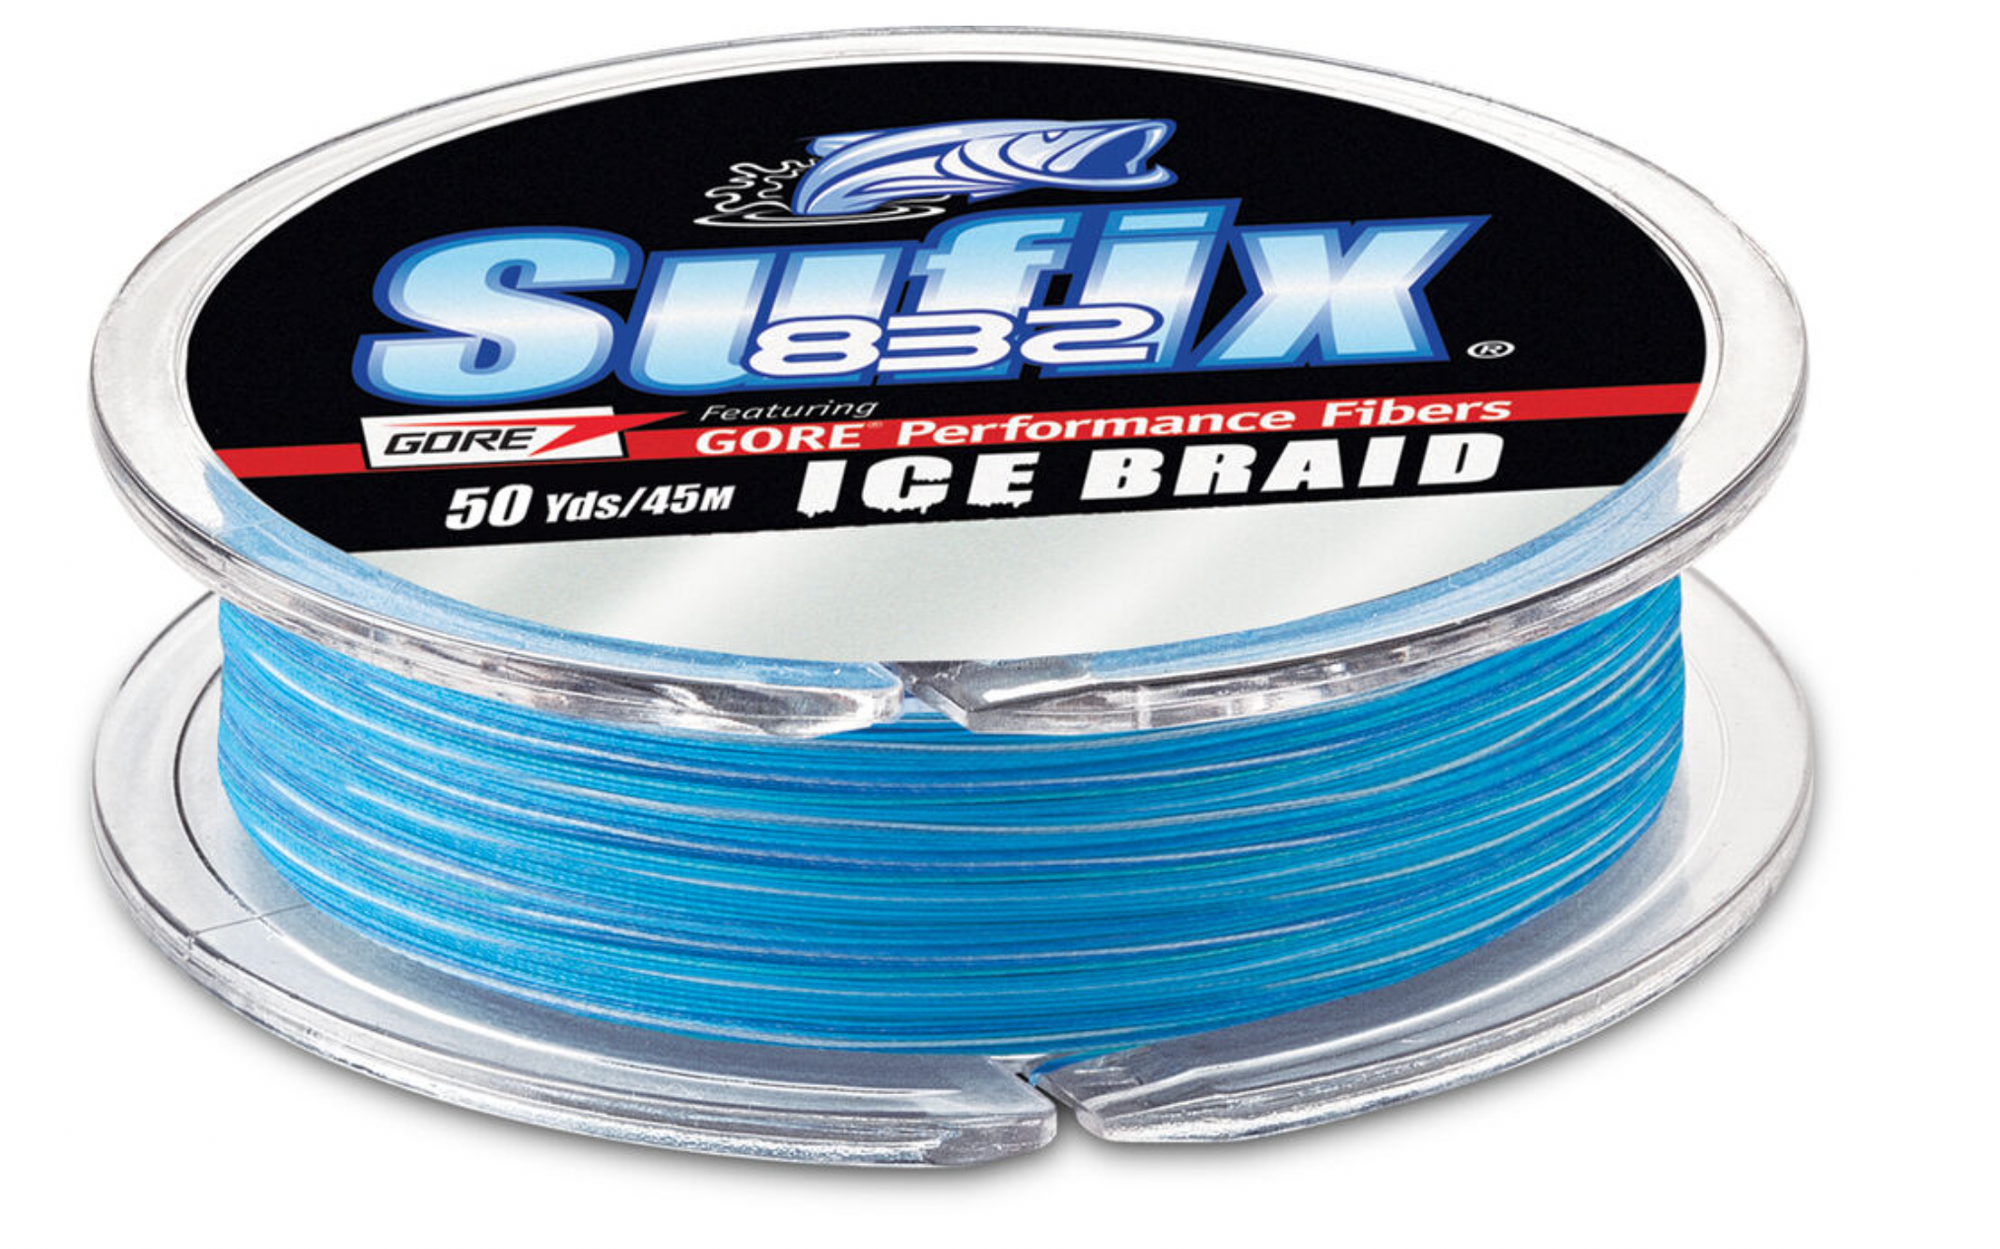 Reaction Tackle Braided Fishing Line Blue Camo 6LB 150yd, Braided Line -   Canada